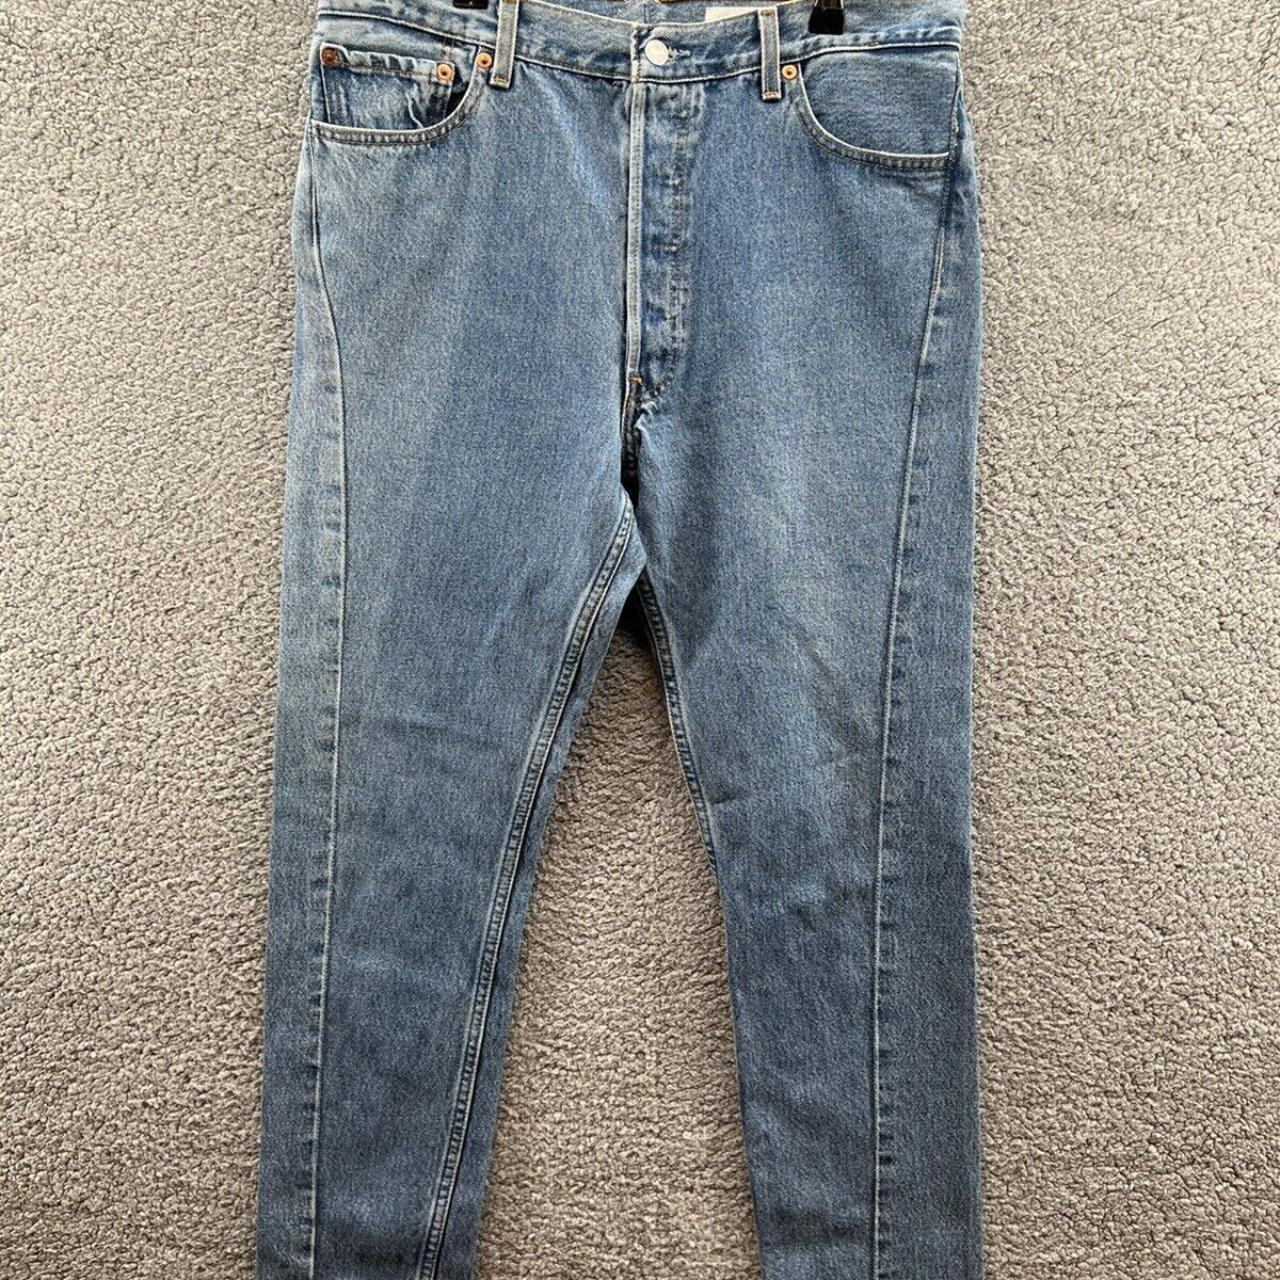 Levi’s 501 Vintage Limited Edition Made In USA Jeans... - Depop